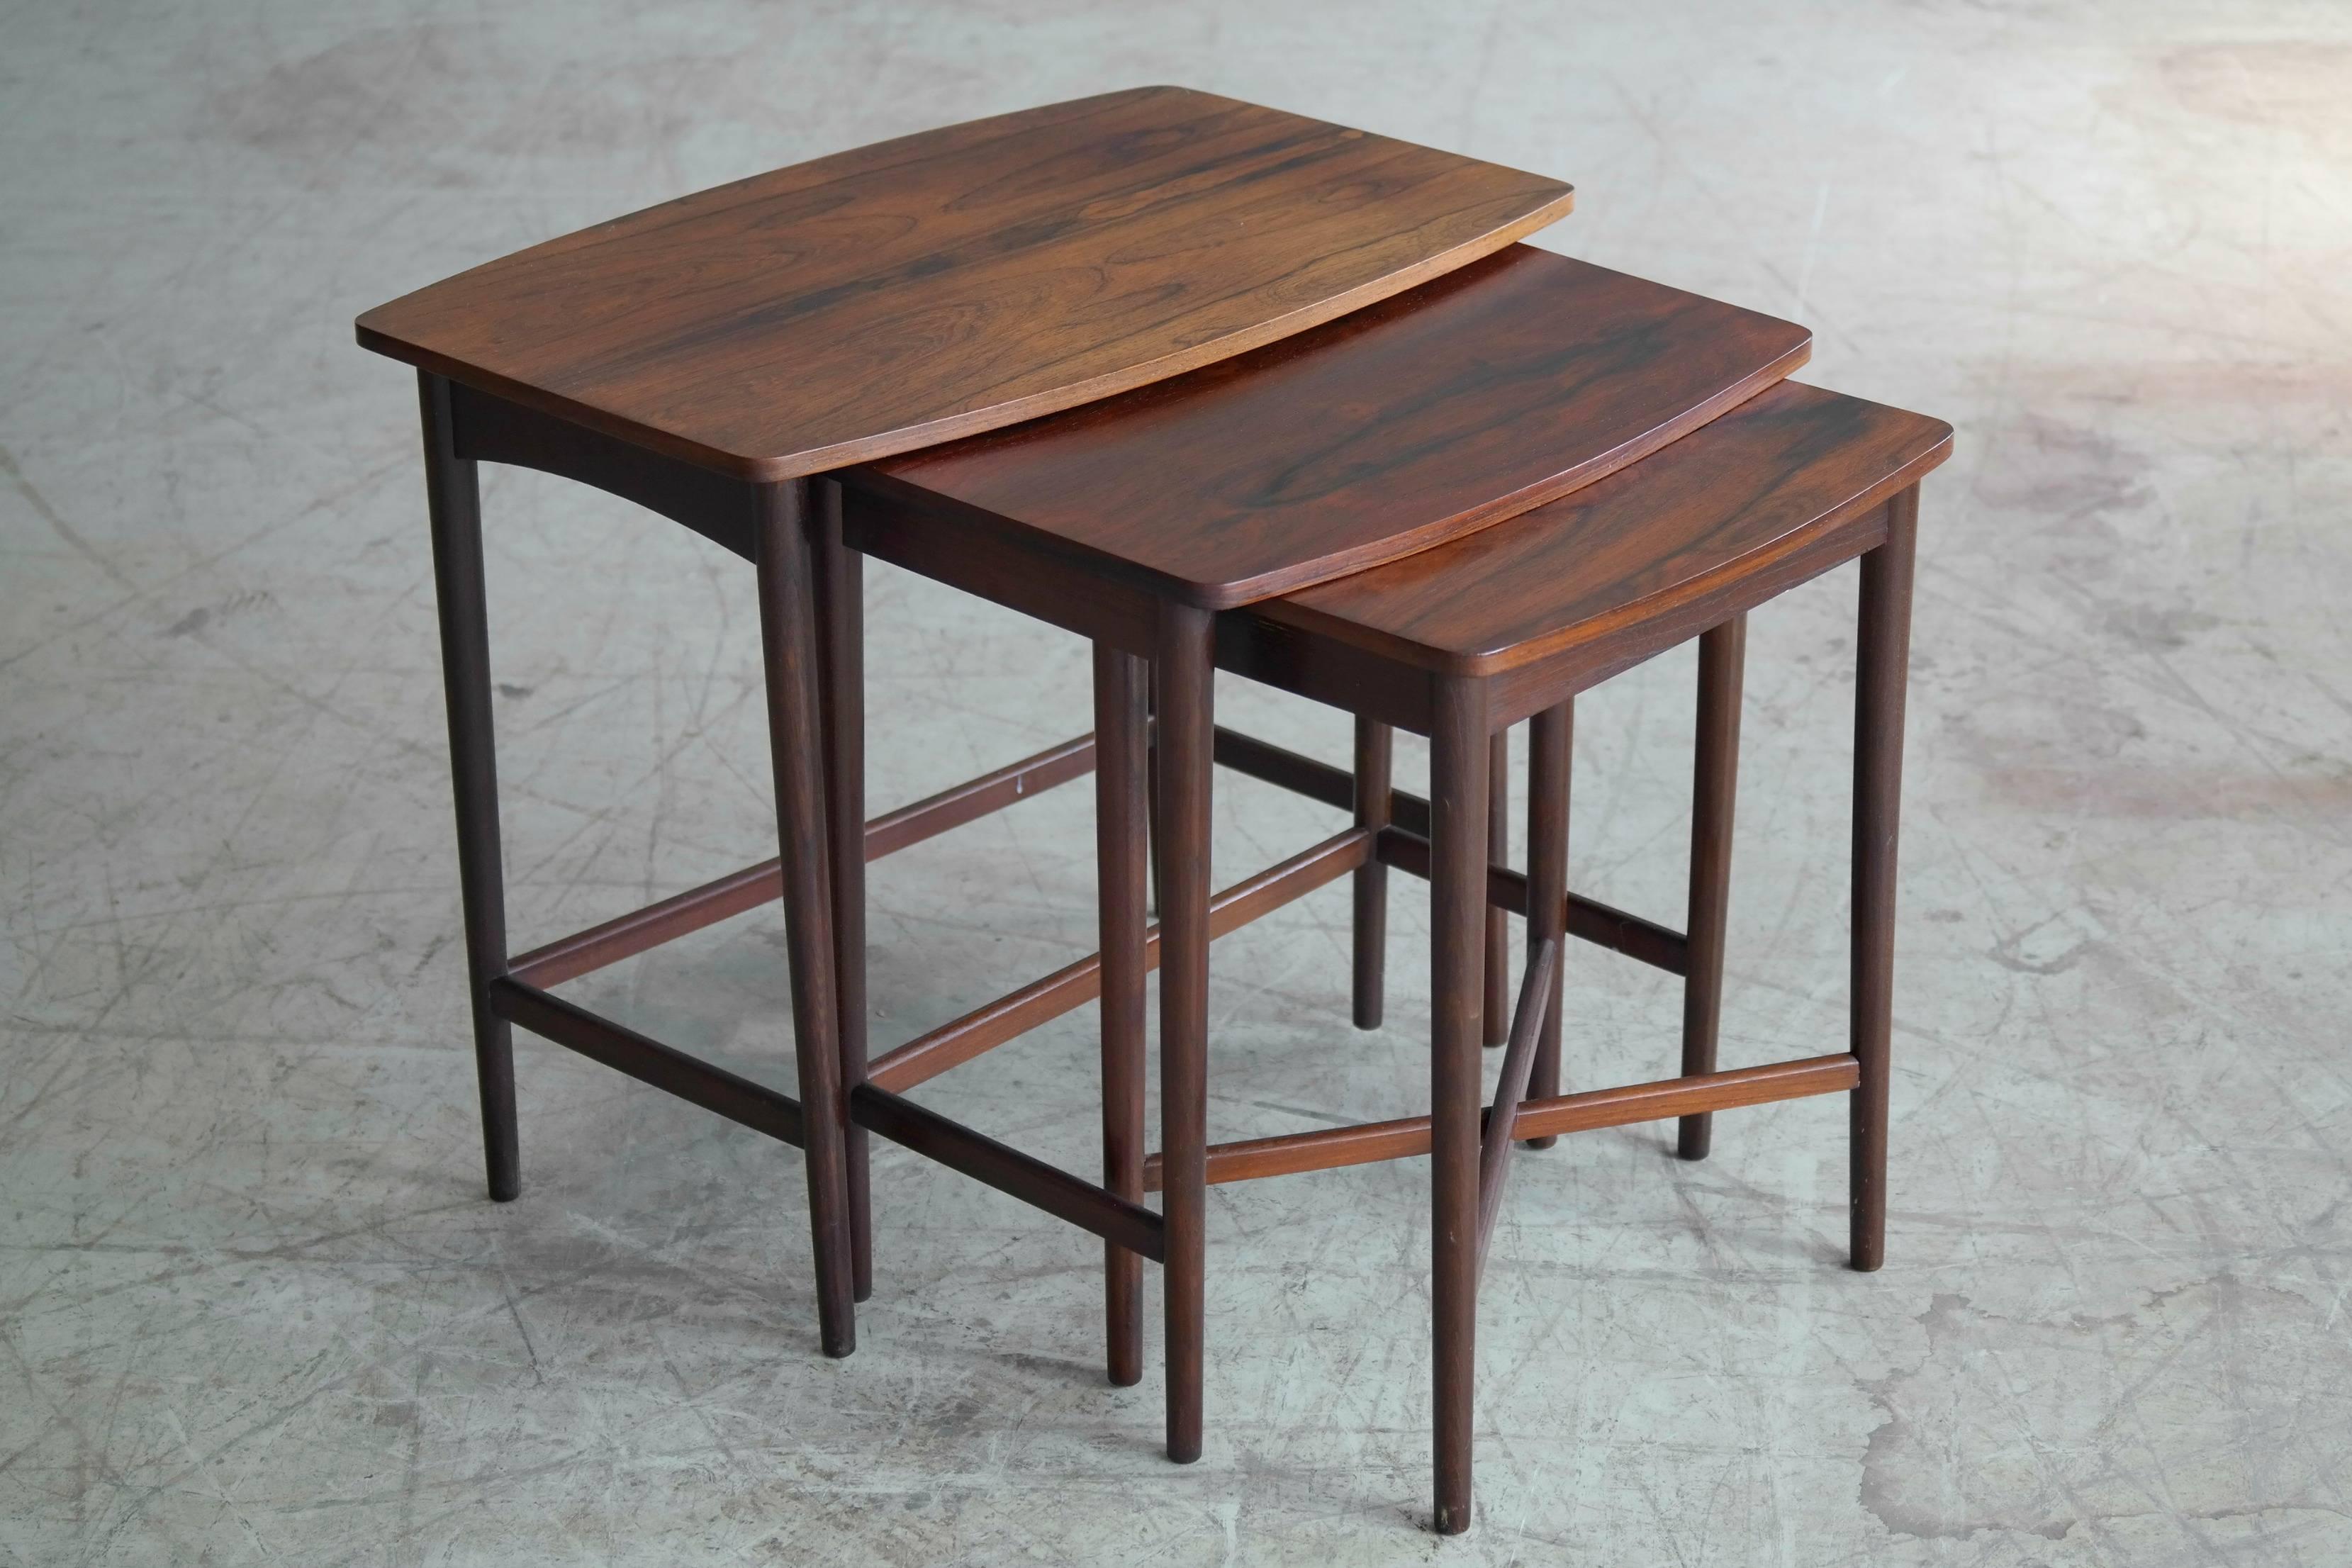 Very nice set of three Danish nesting tables in rosewood in the style of Johannes Andersen. The tables vary slightly in color with the middle table being slightly darker, while the other two tables have faded a little bit due to sun exposure. Some